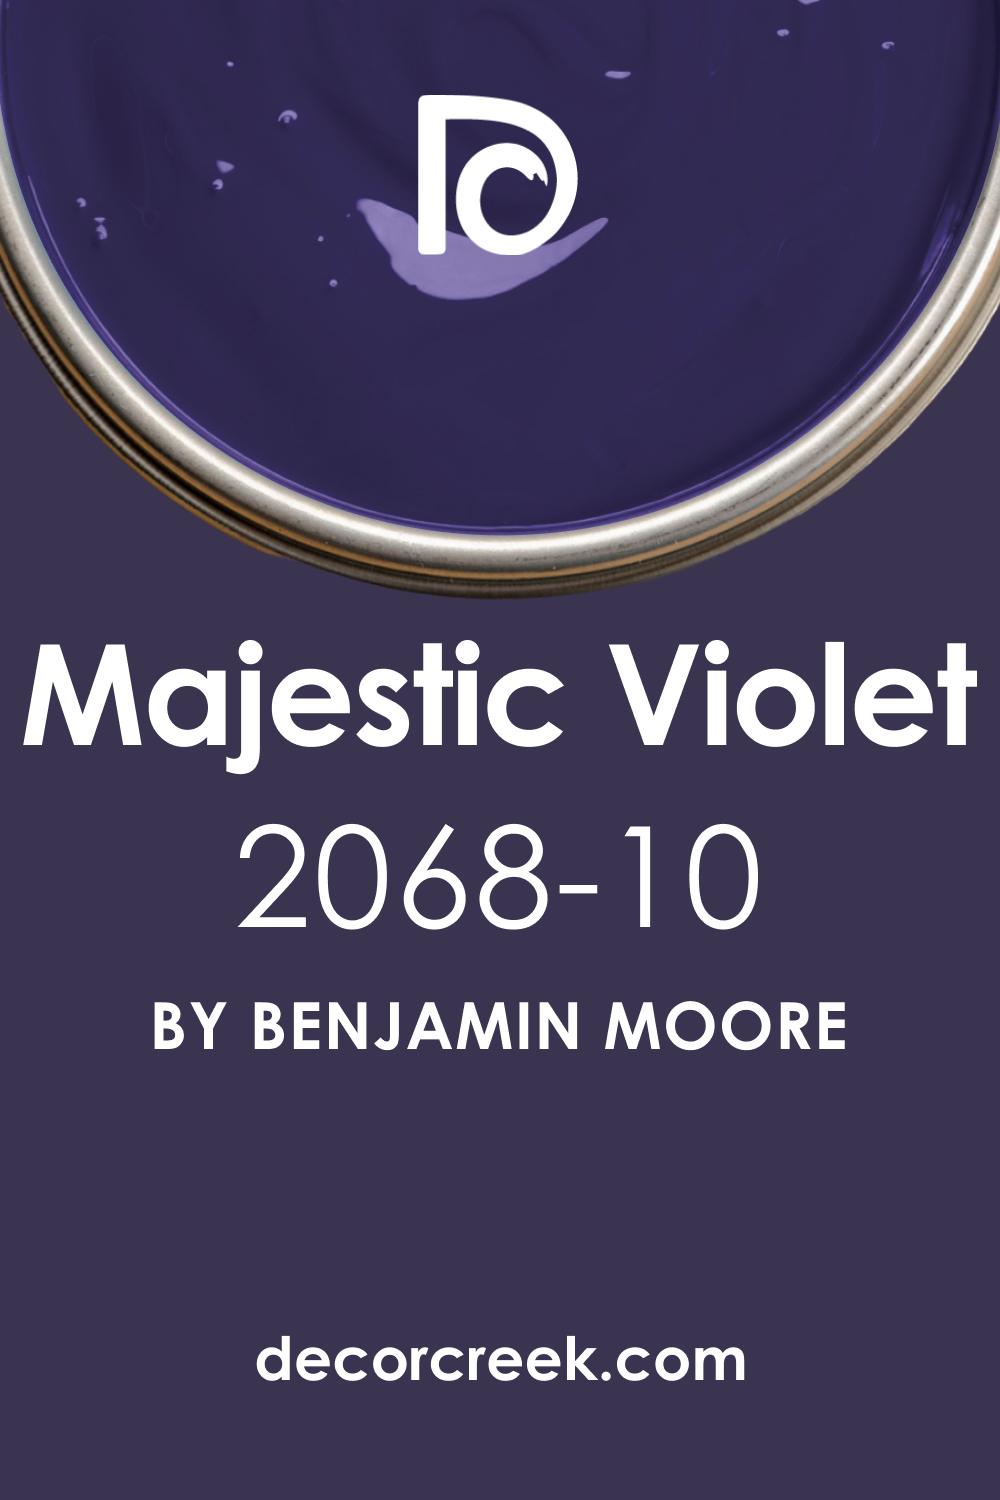 What Color Is Majestic Violet 2068-10?